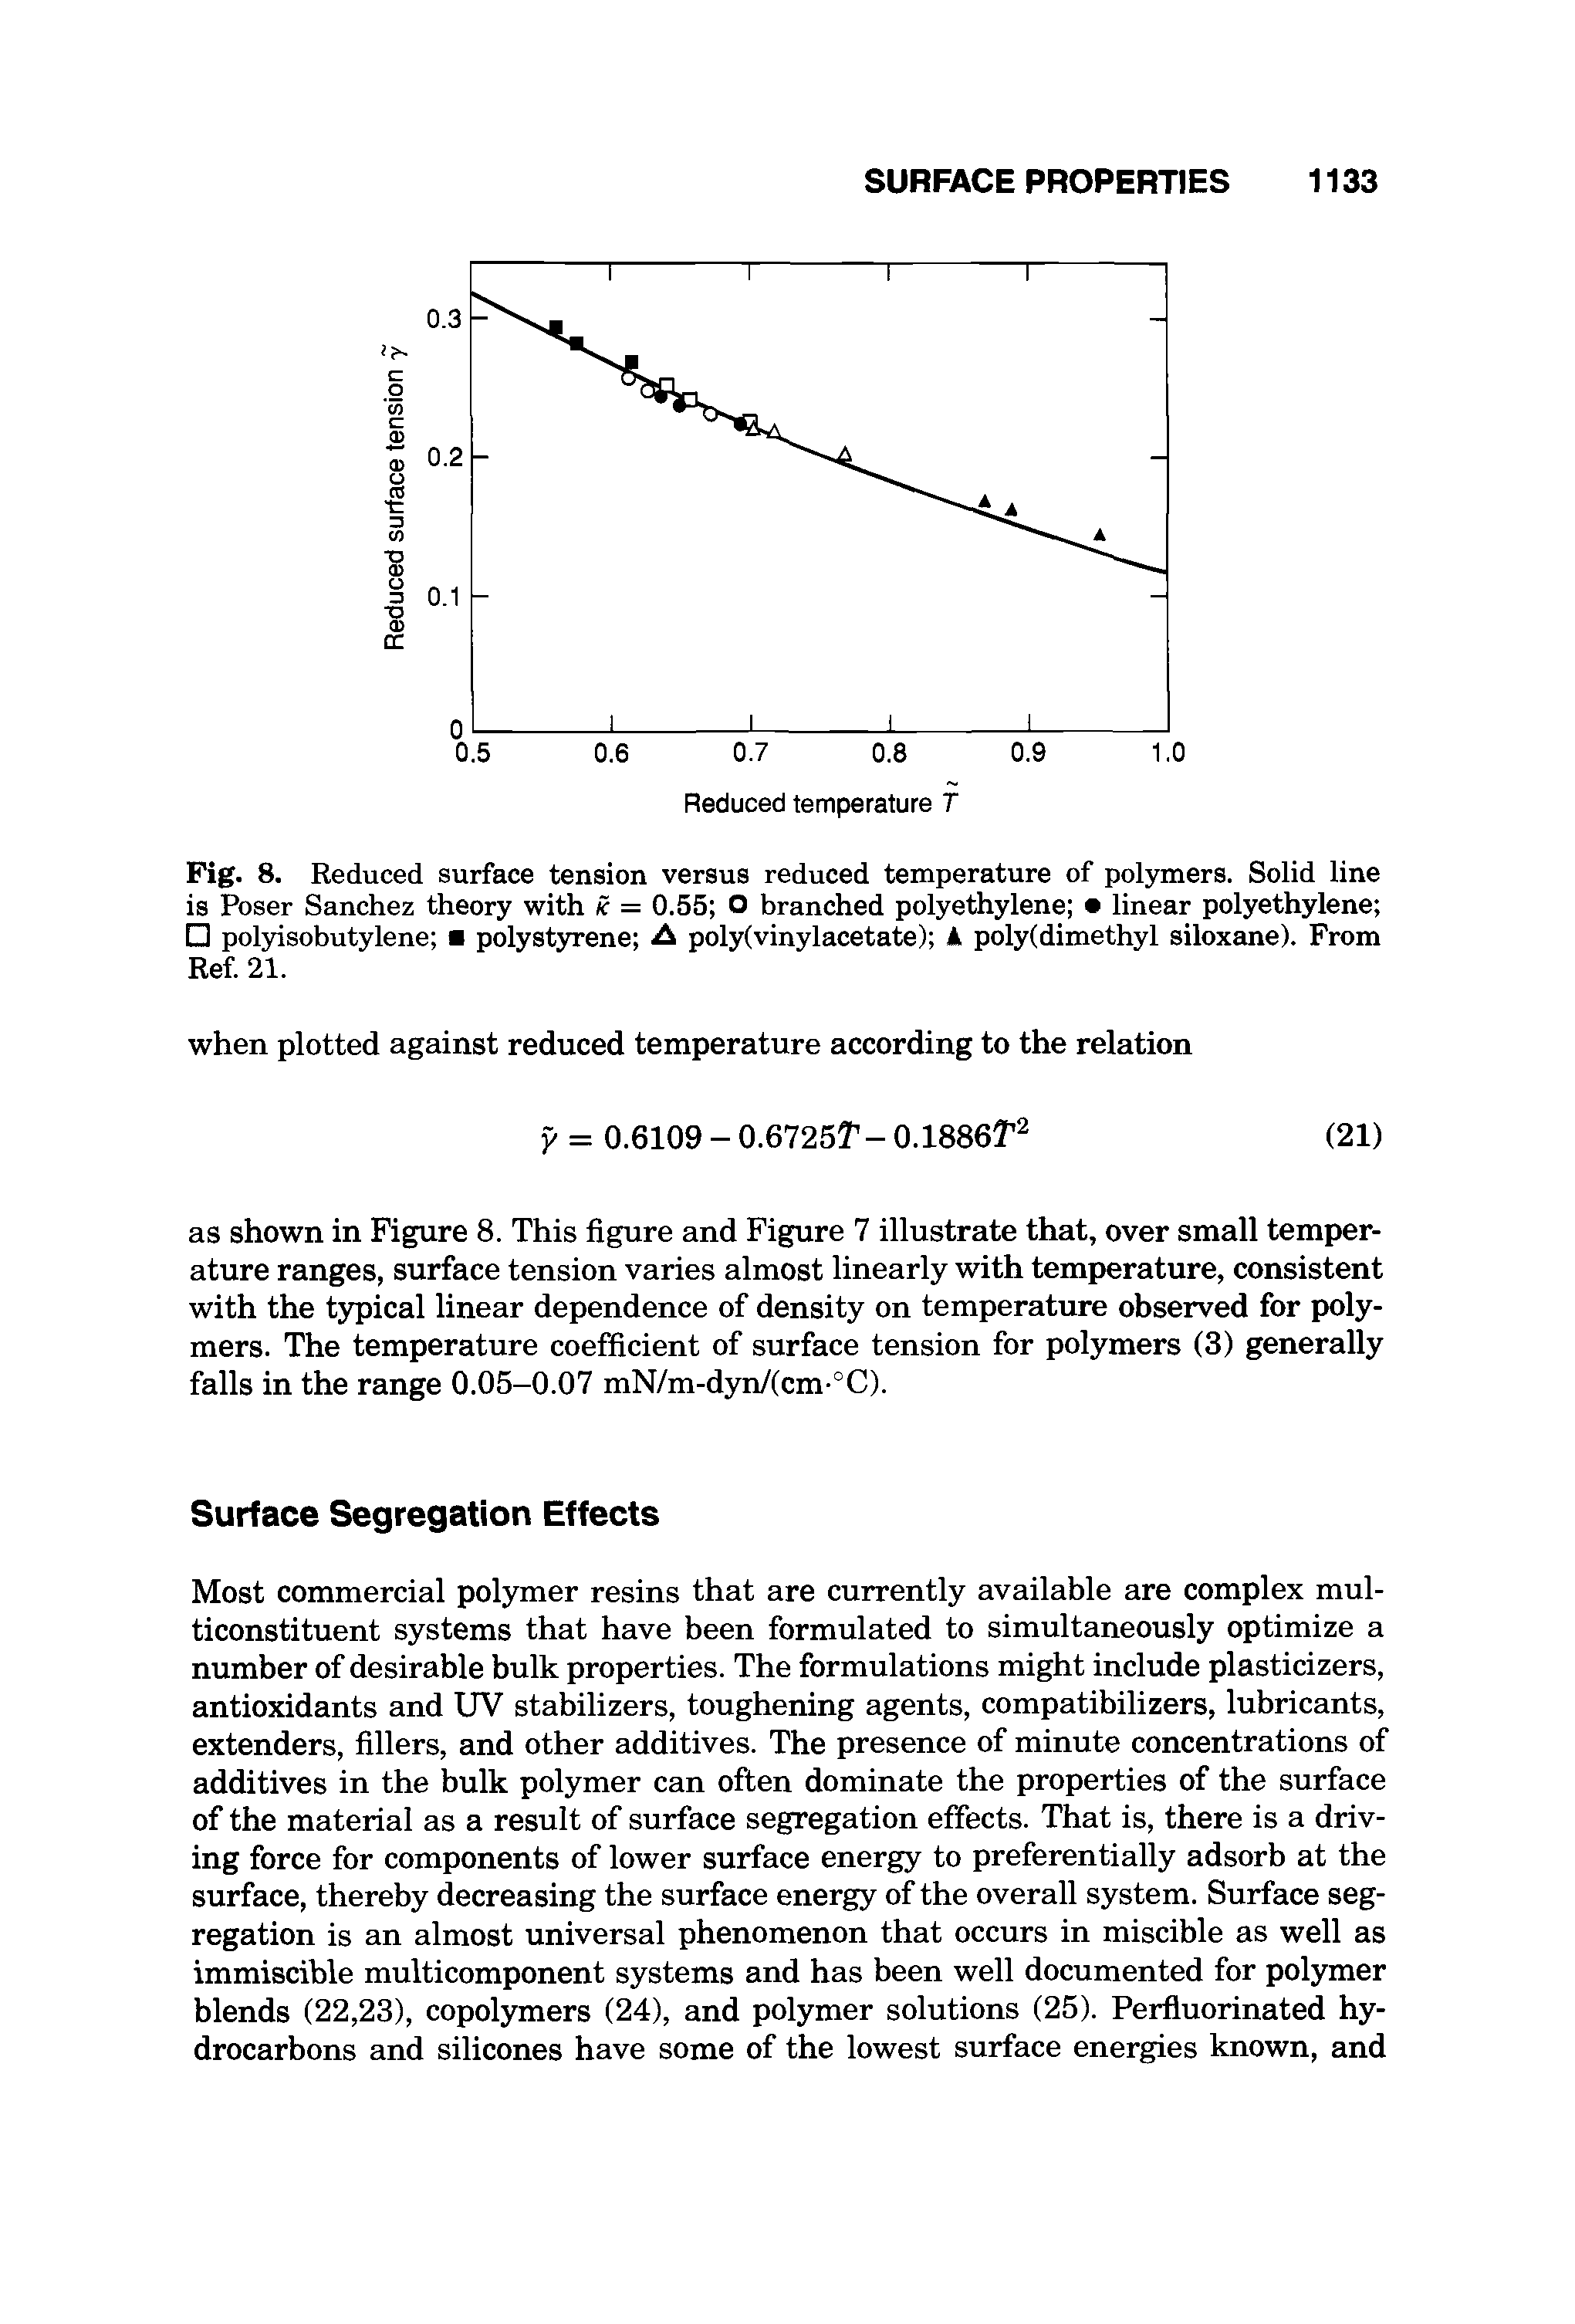 Fig. 8. Reduced surface tension versus reduced temperature of polymers. Solid line is Poser Sanchez theory with ic = 0.55 O branched polyethylene linear polyethylene polyisobutylene polystyrene A poly(vinylacetate) A poly(dimethyl siloxane). From Ref. 21.